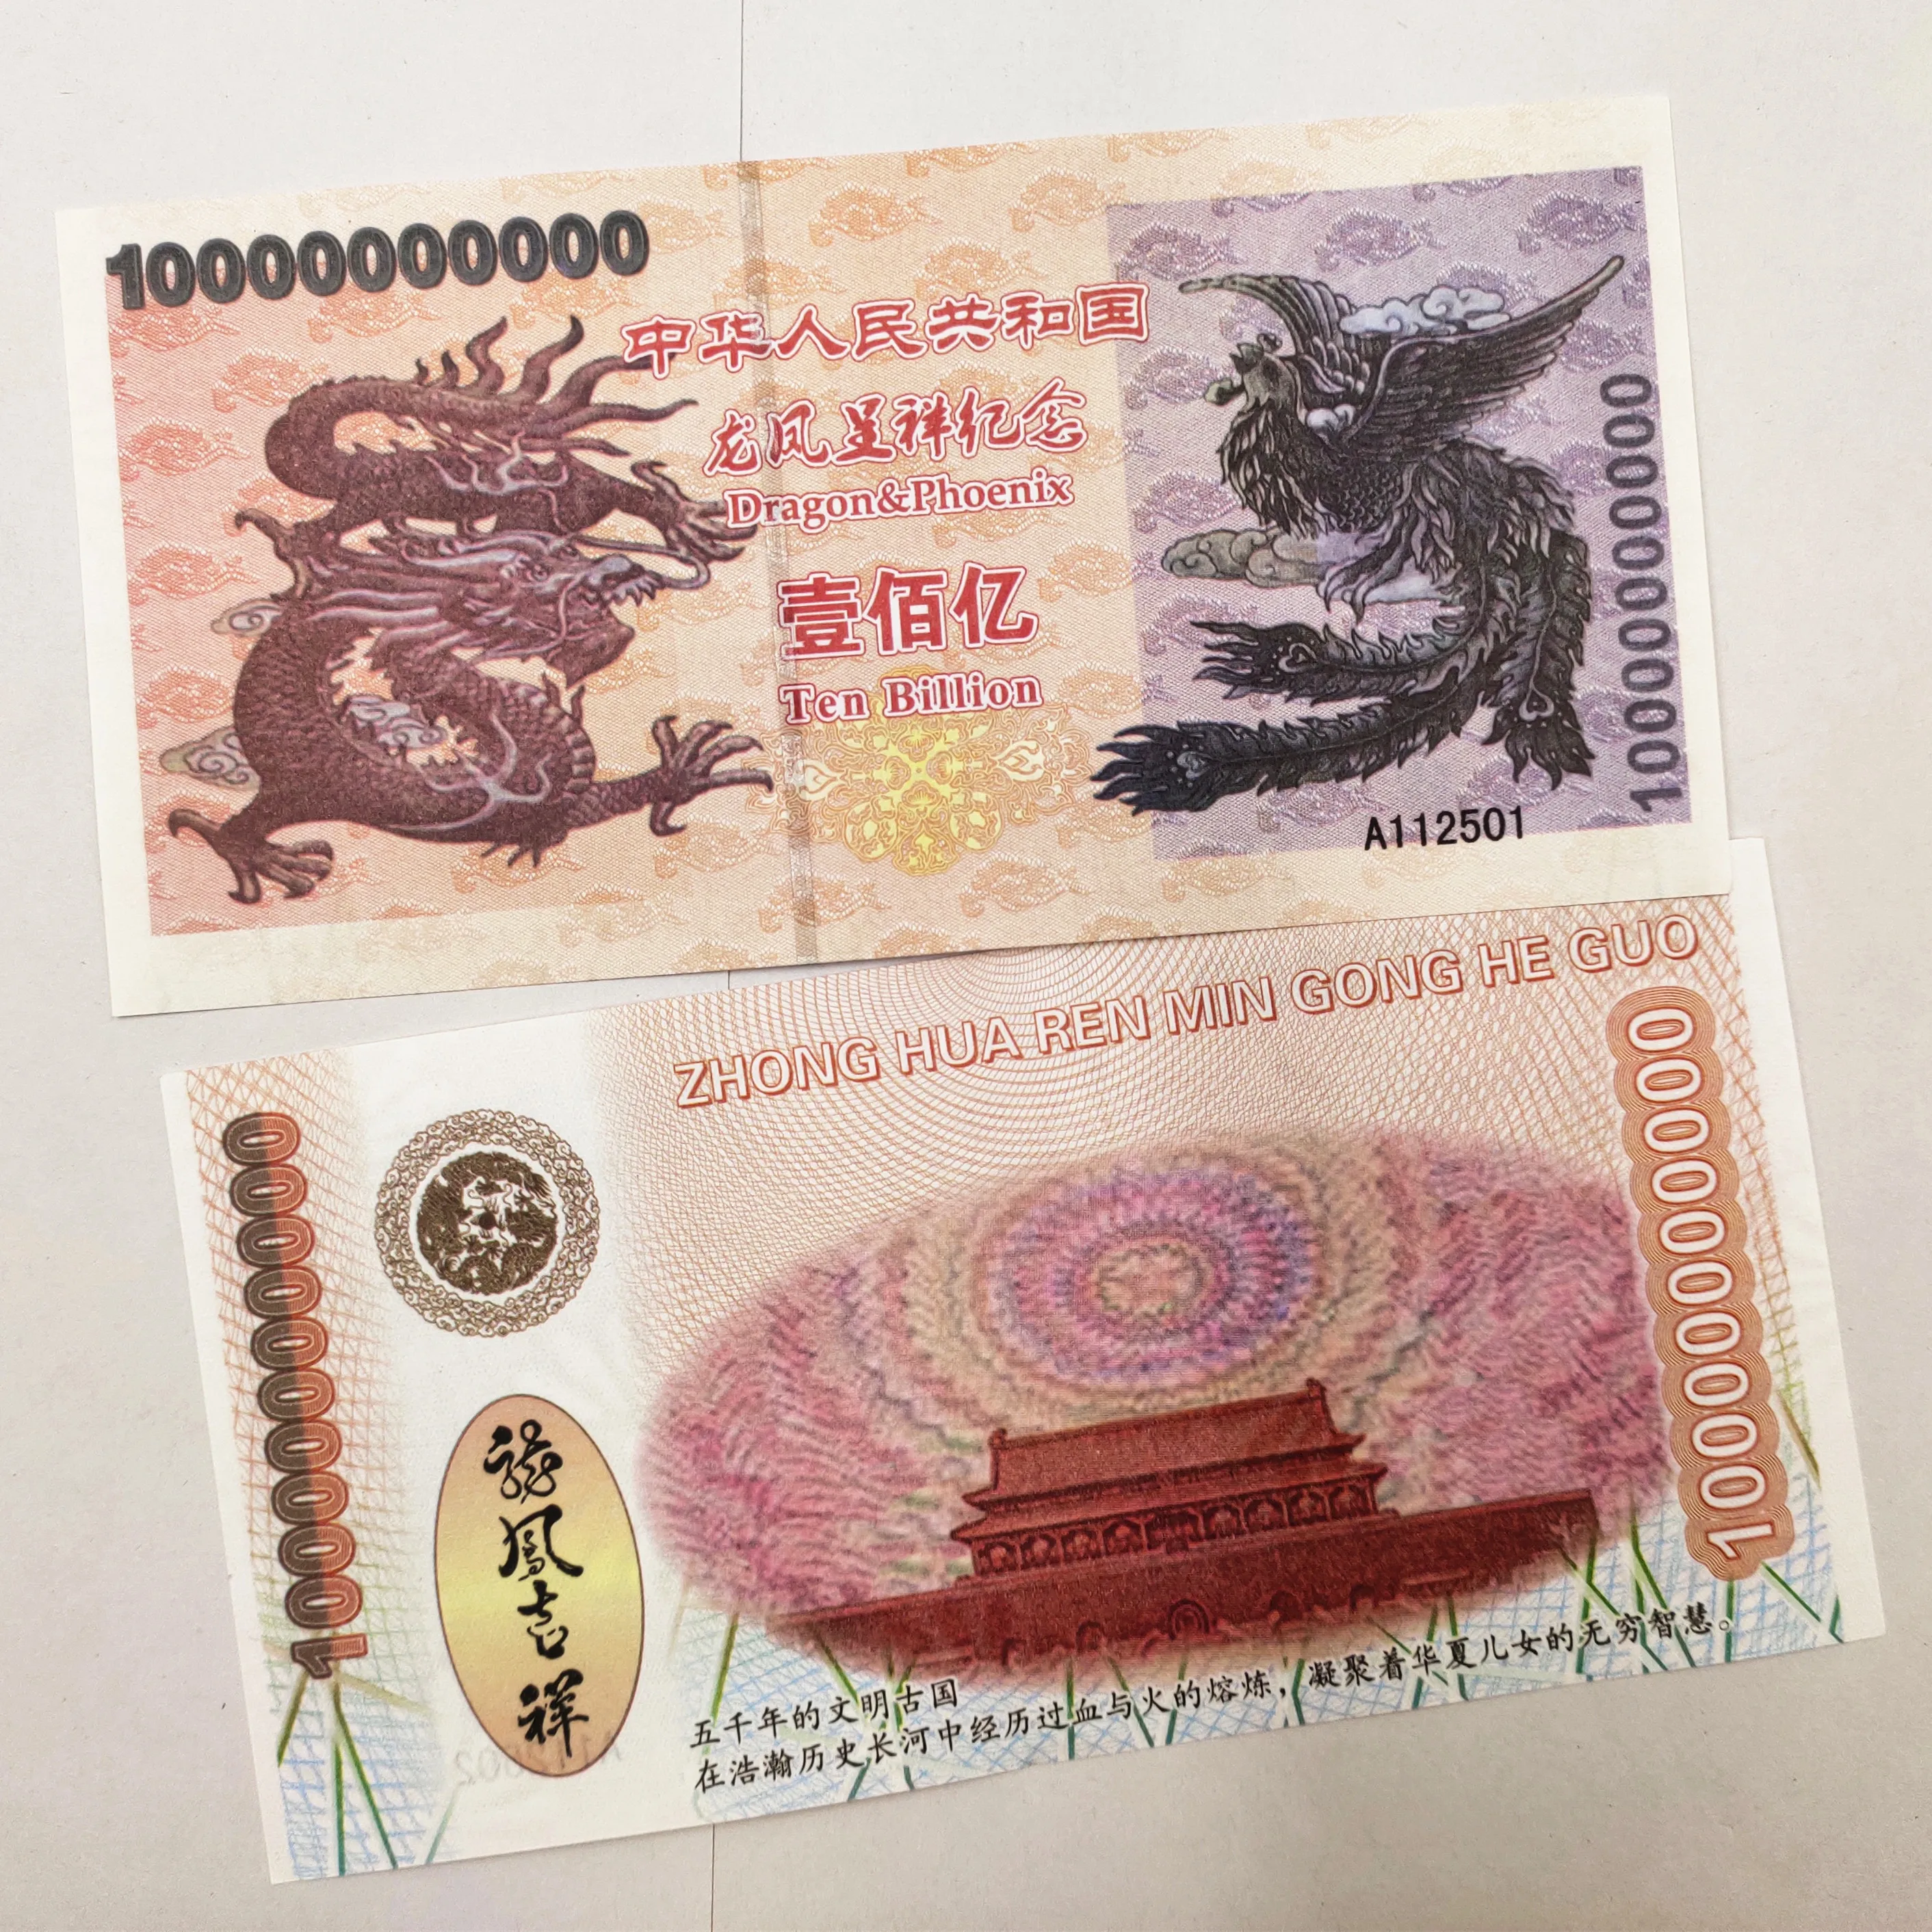 10 Pieces Of Chinese ONE CENTILLION Dragon and Phoenix Banknotes/With UV Light